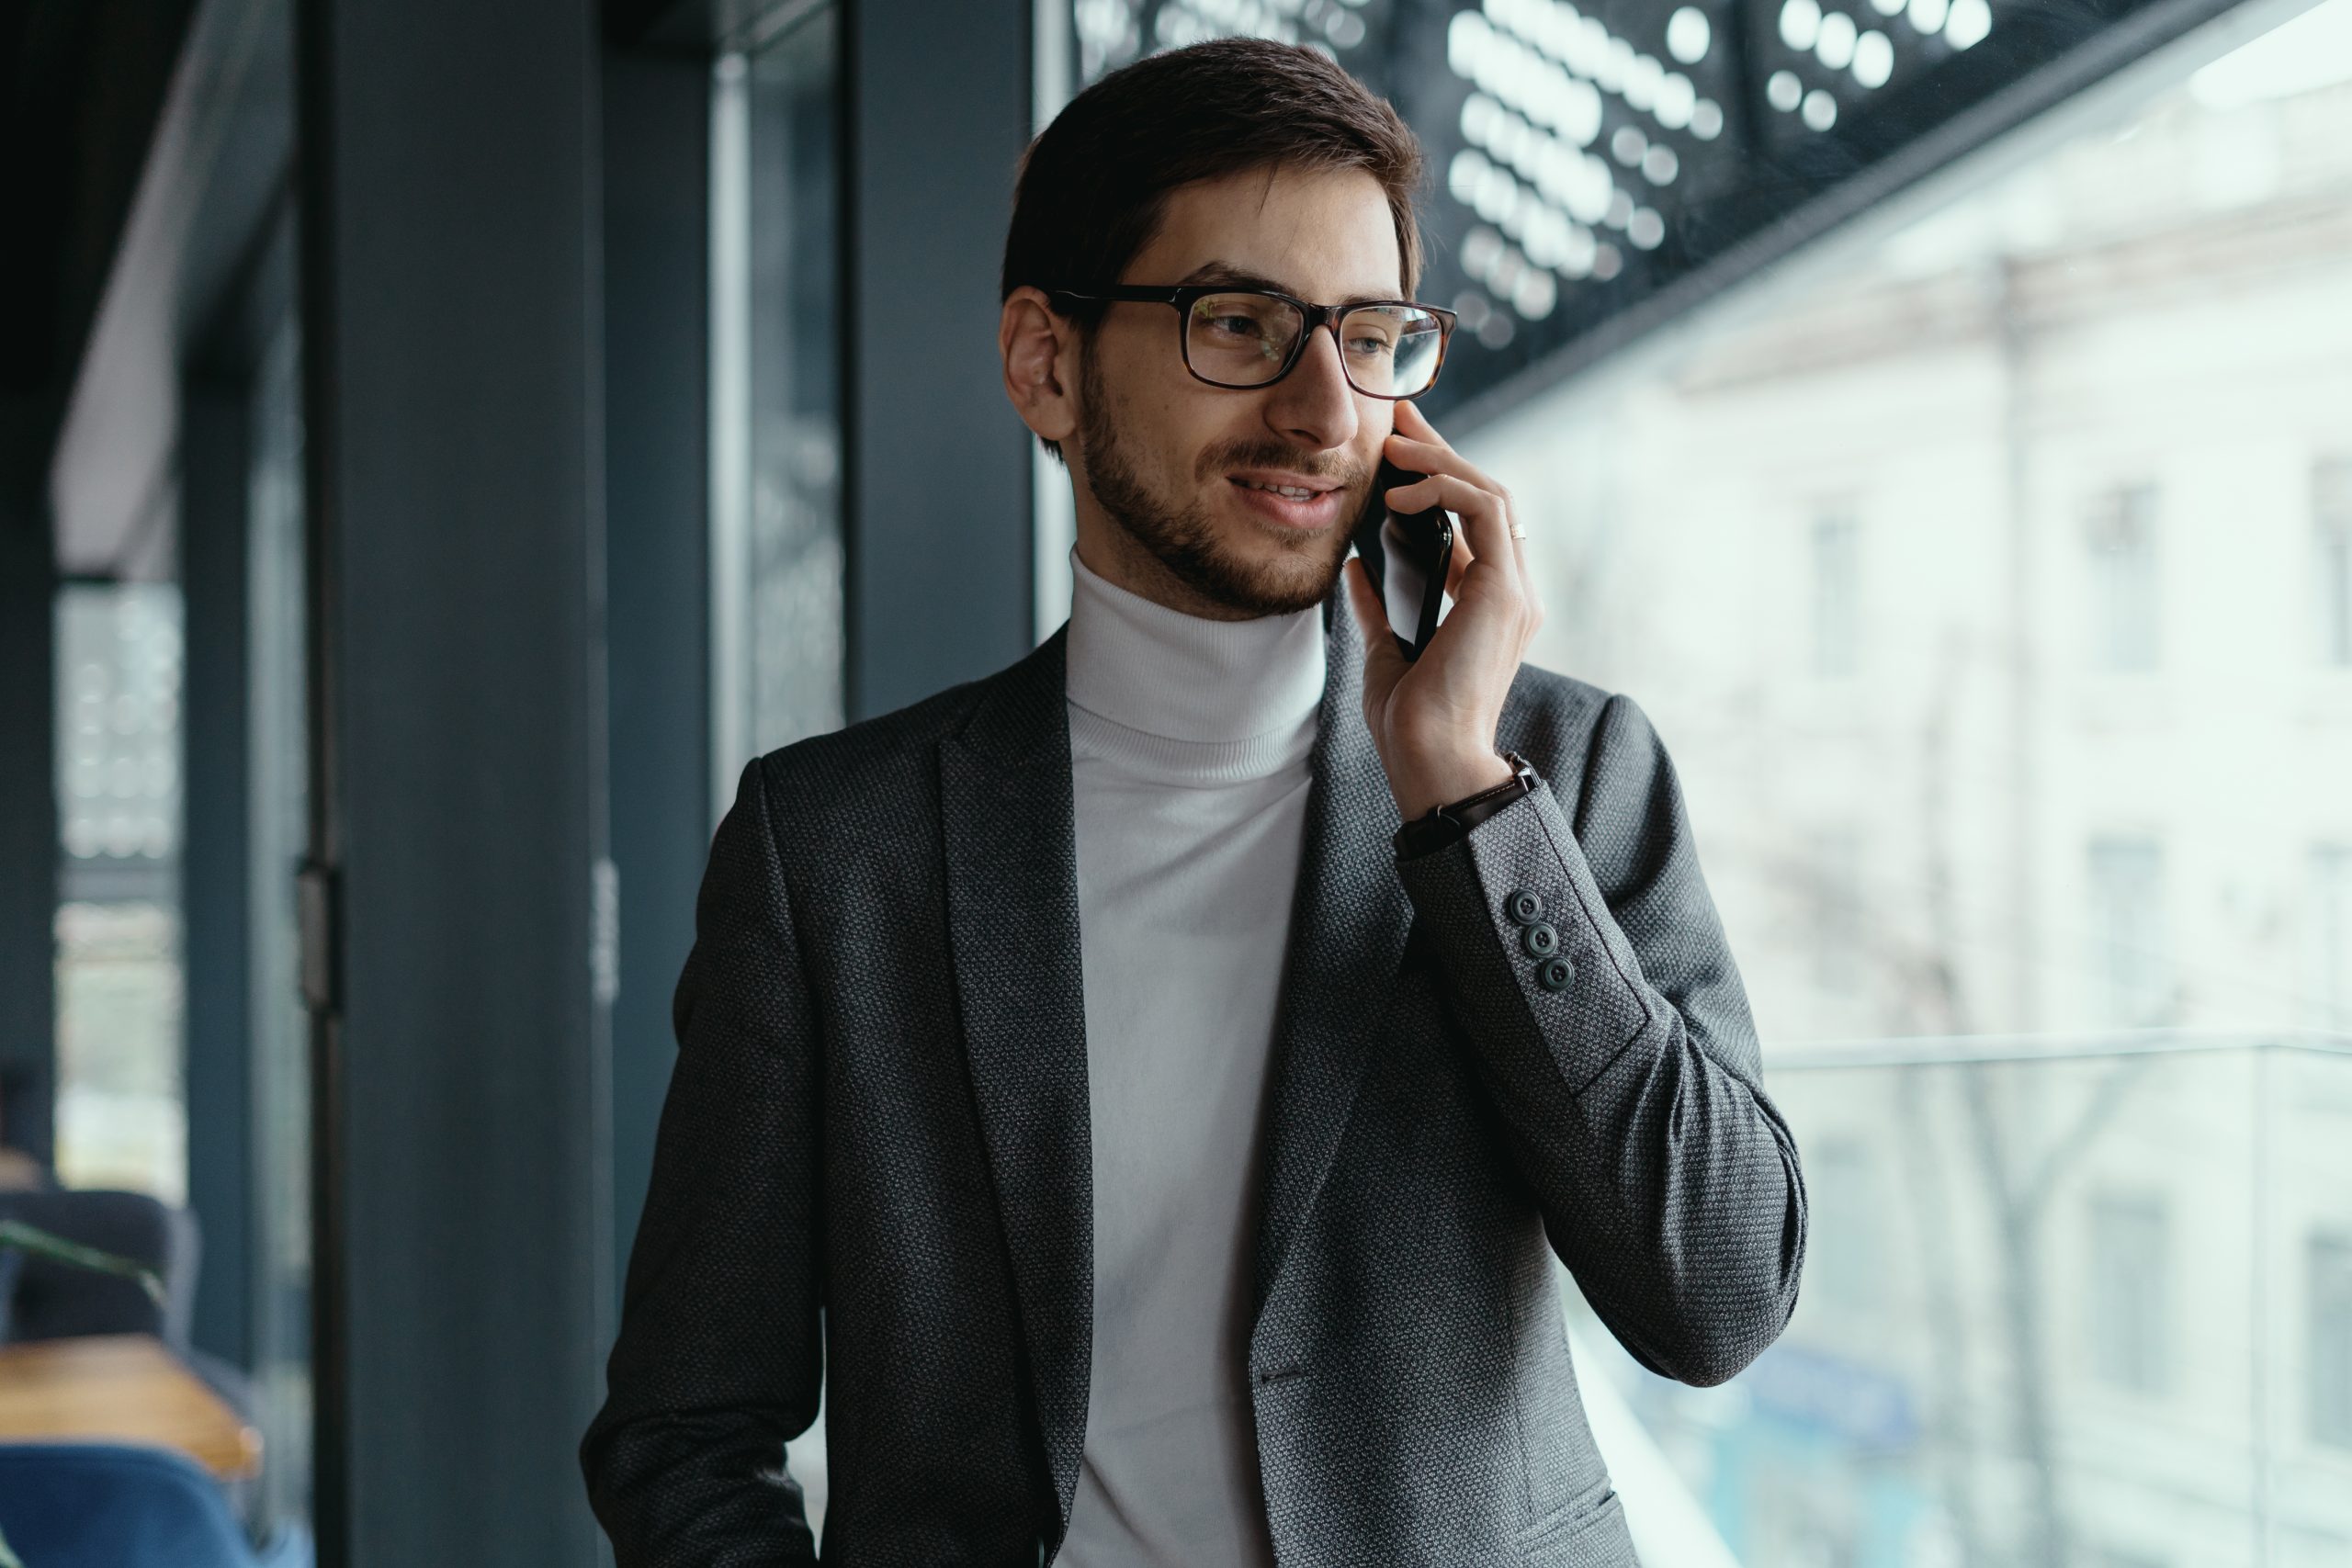 A charismatic young business man wearing glasses, gray jacket, white turtleneck having a conversation on the phone in a modern space